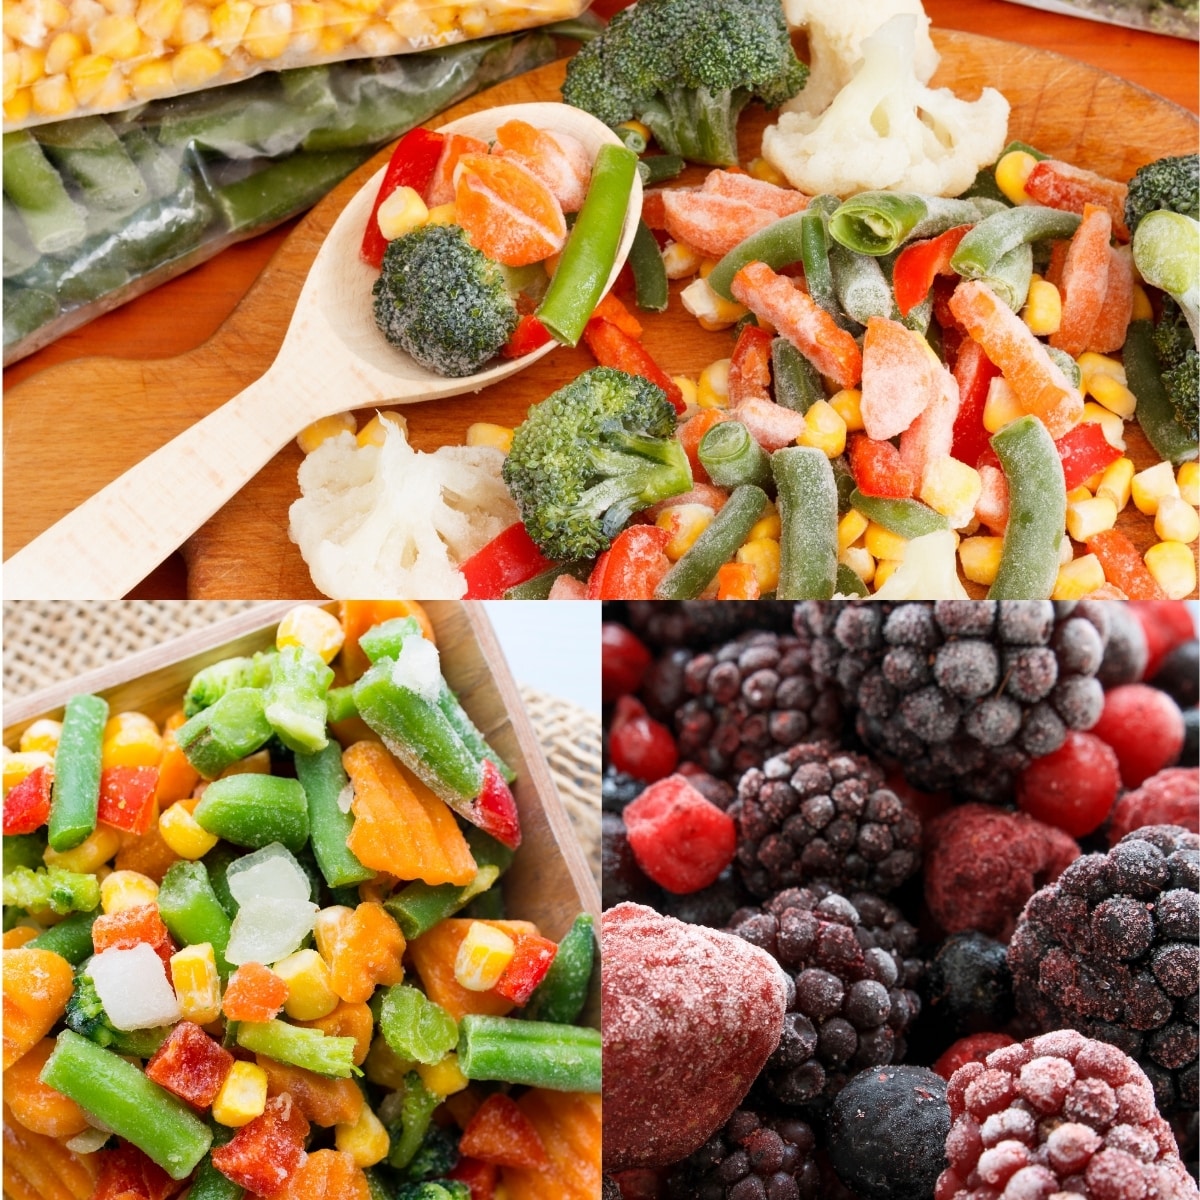 Freezer-Friendly Fruits and Veggies  collage